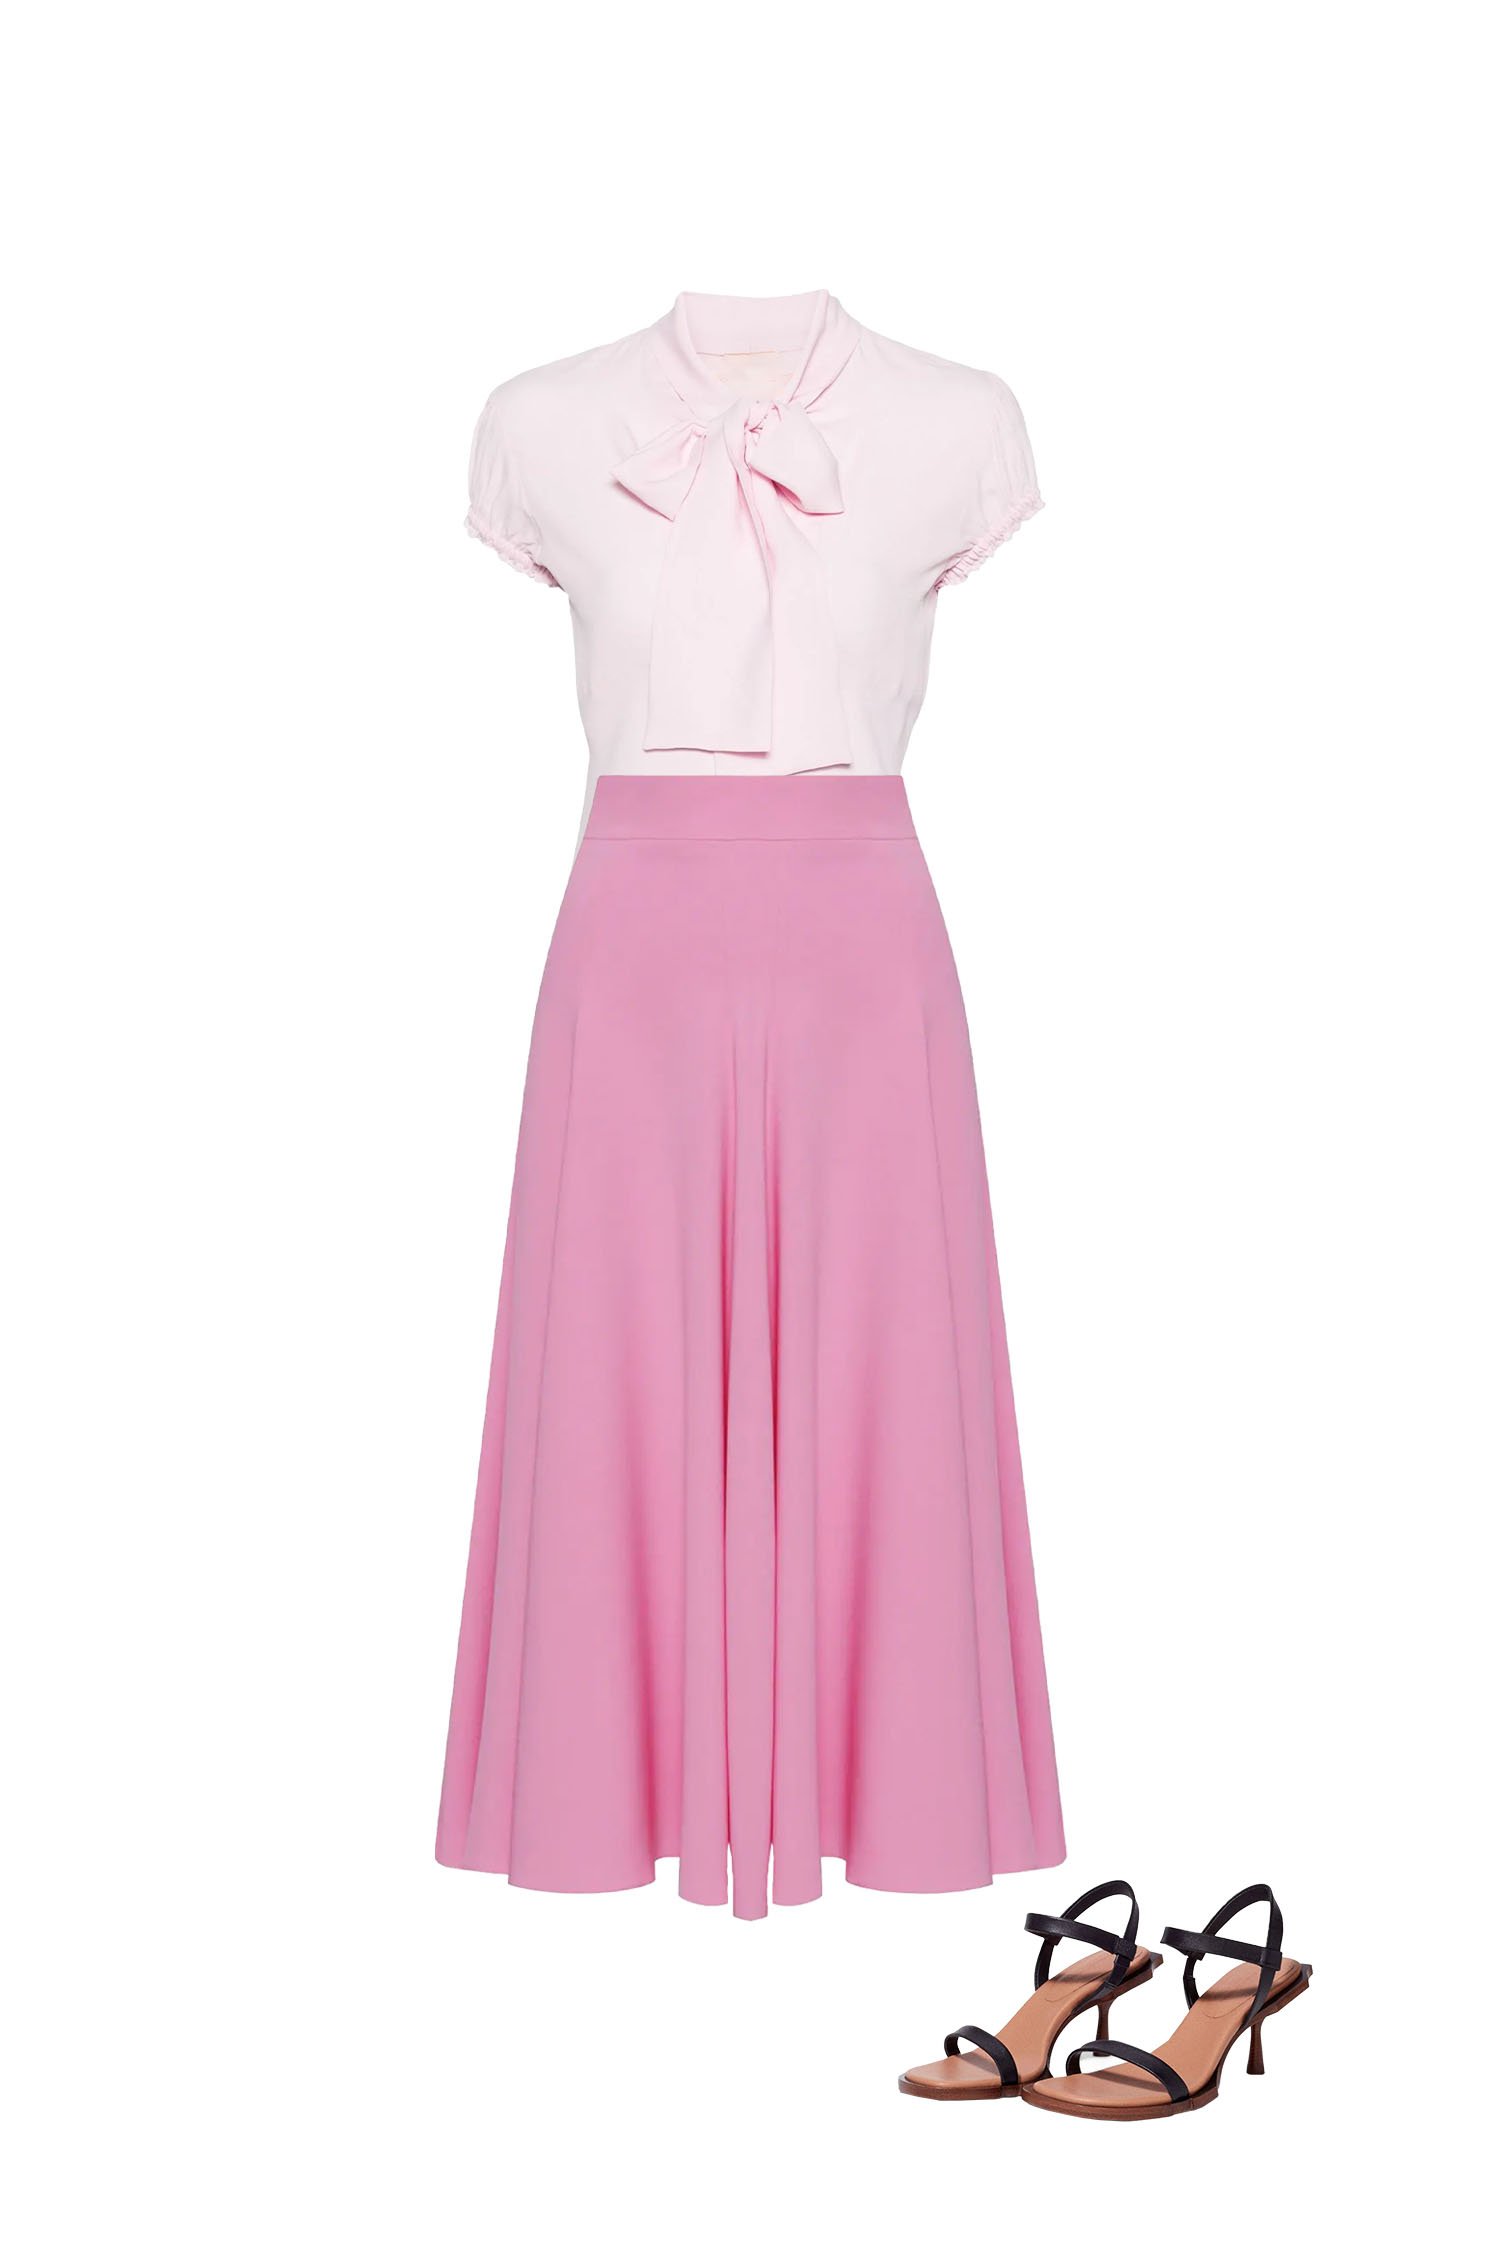 Light Pink Short Sleeve Pussy-Bow Top and Bubblegum Pink Circle Skirt Outfit